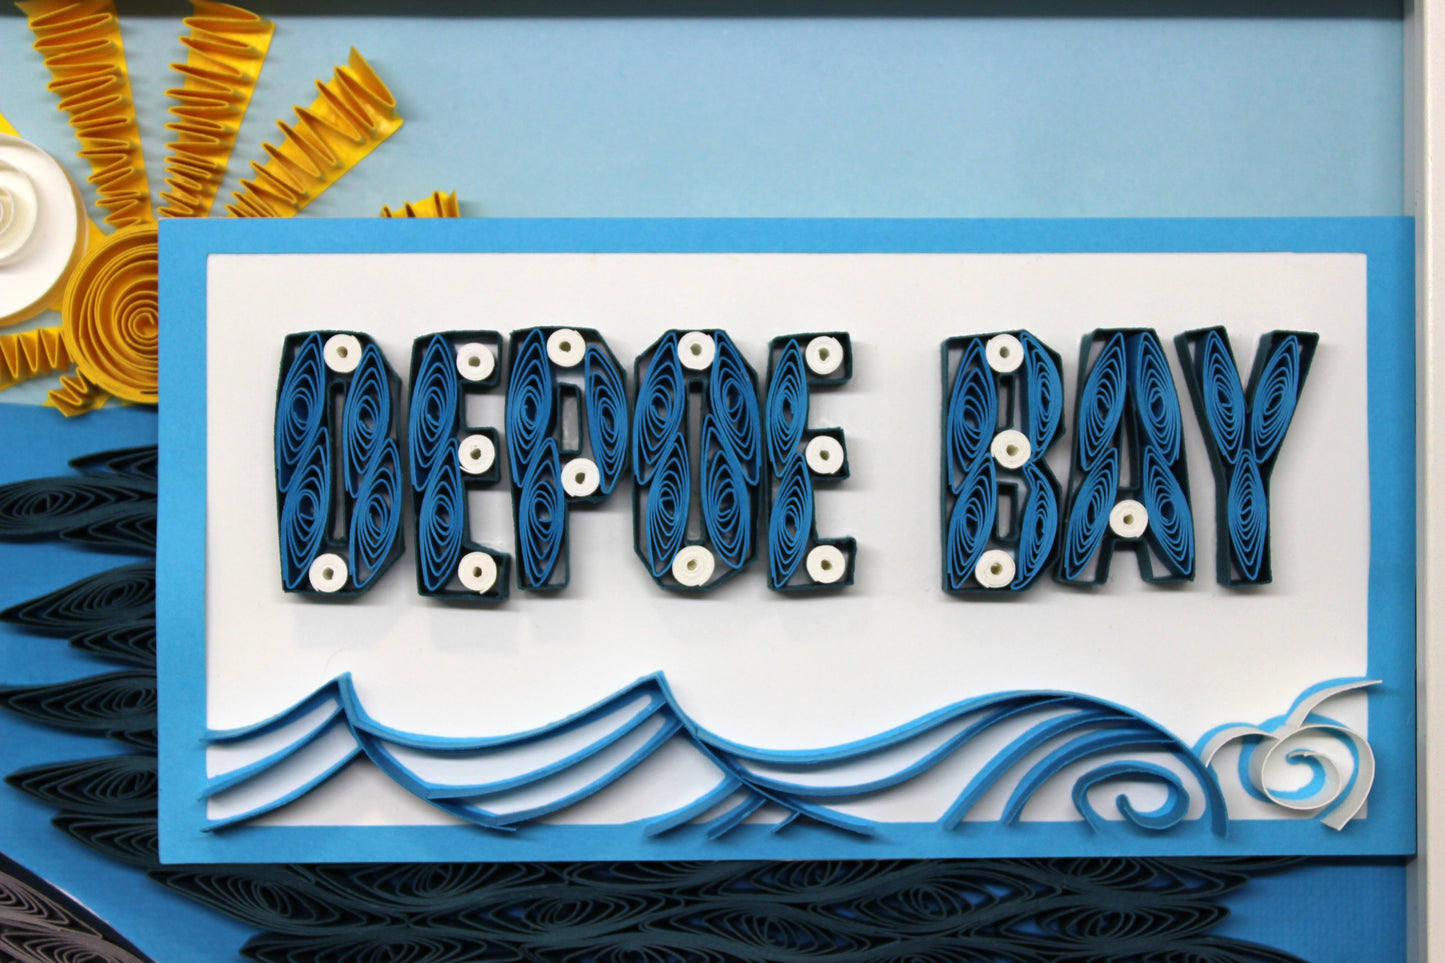 close up detail of quilled "Depoe Bay" sign